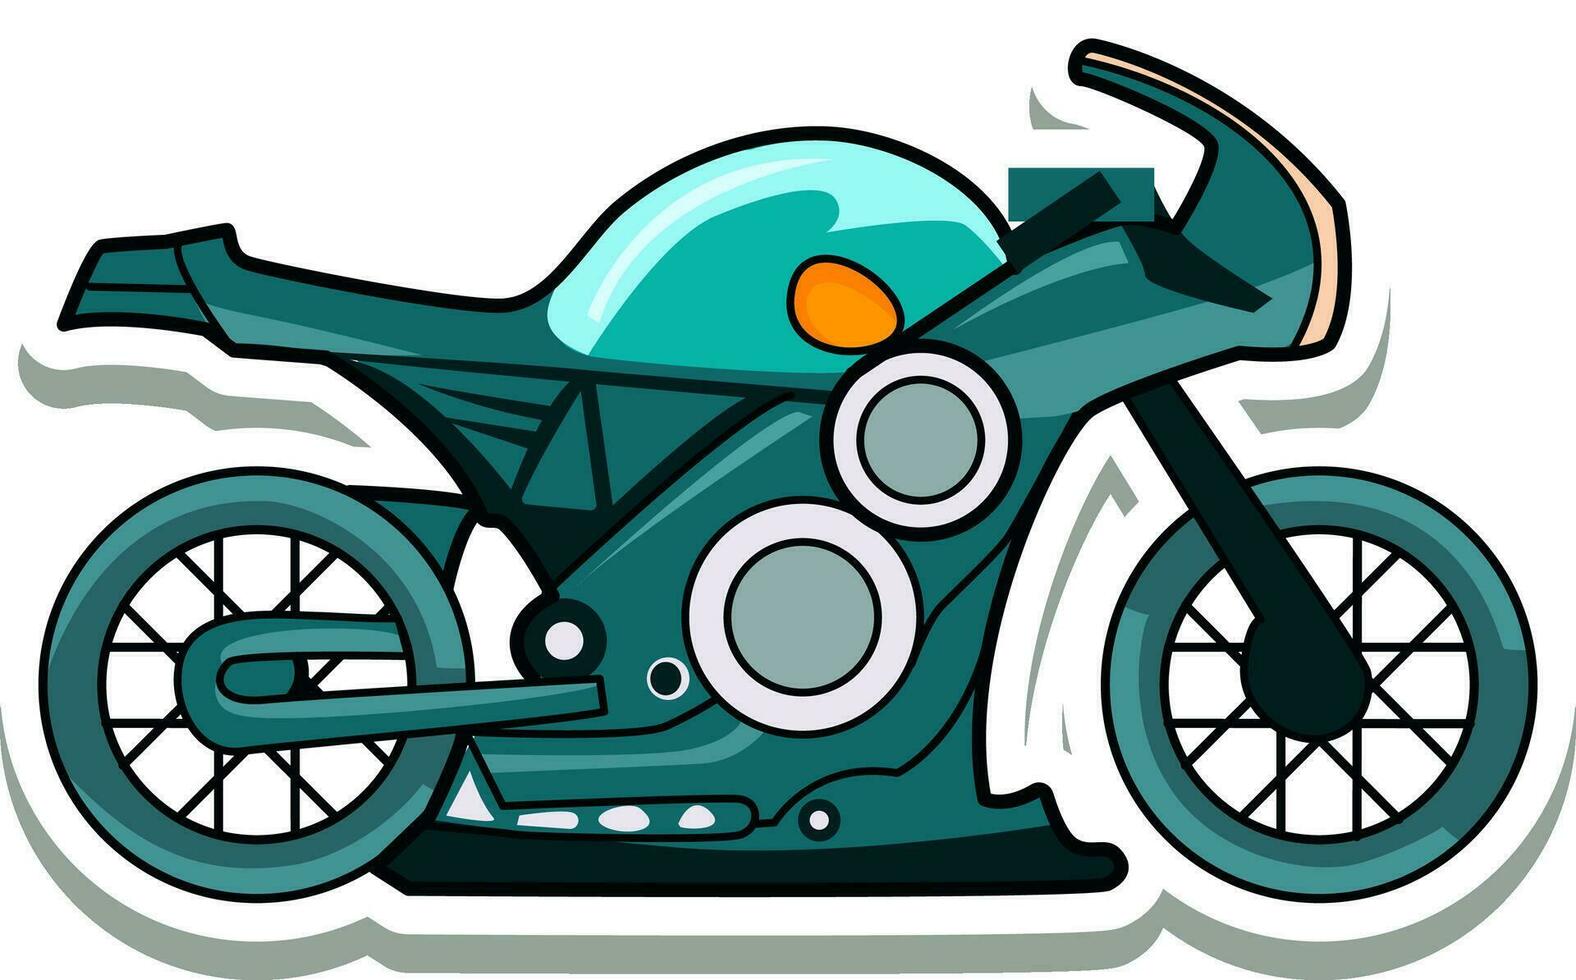 Teal Latest Motorbike In Sticker Style. vector